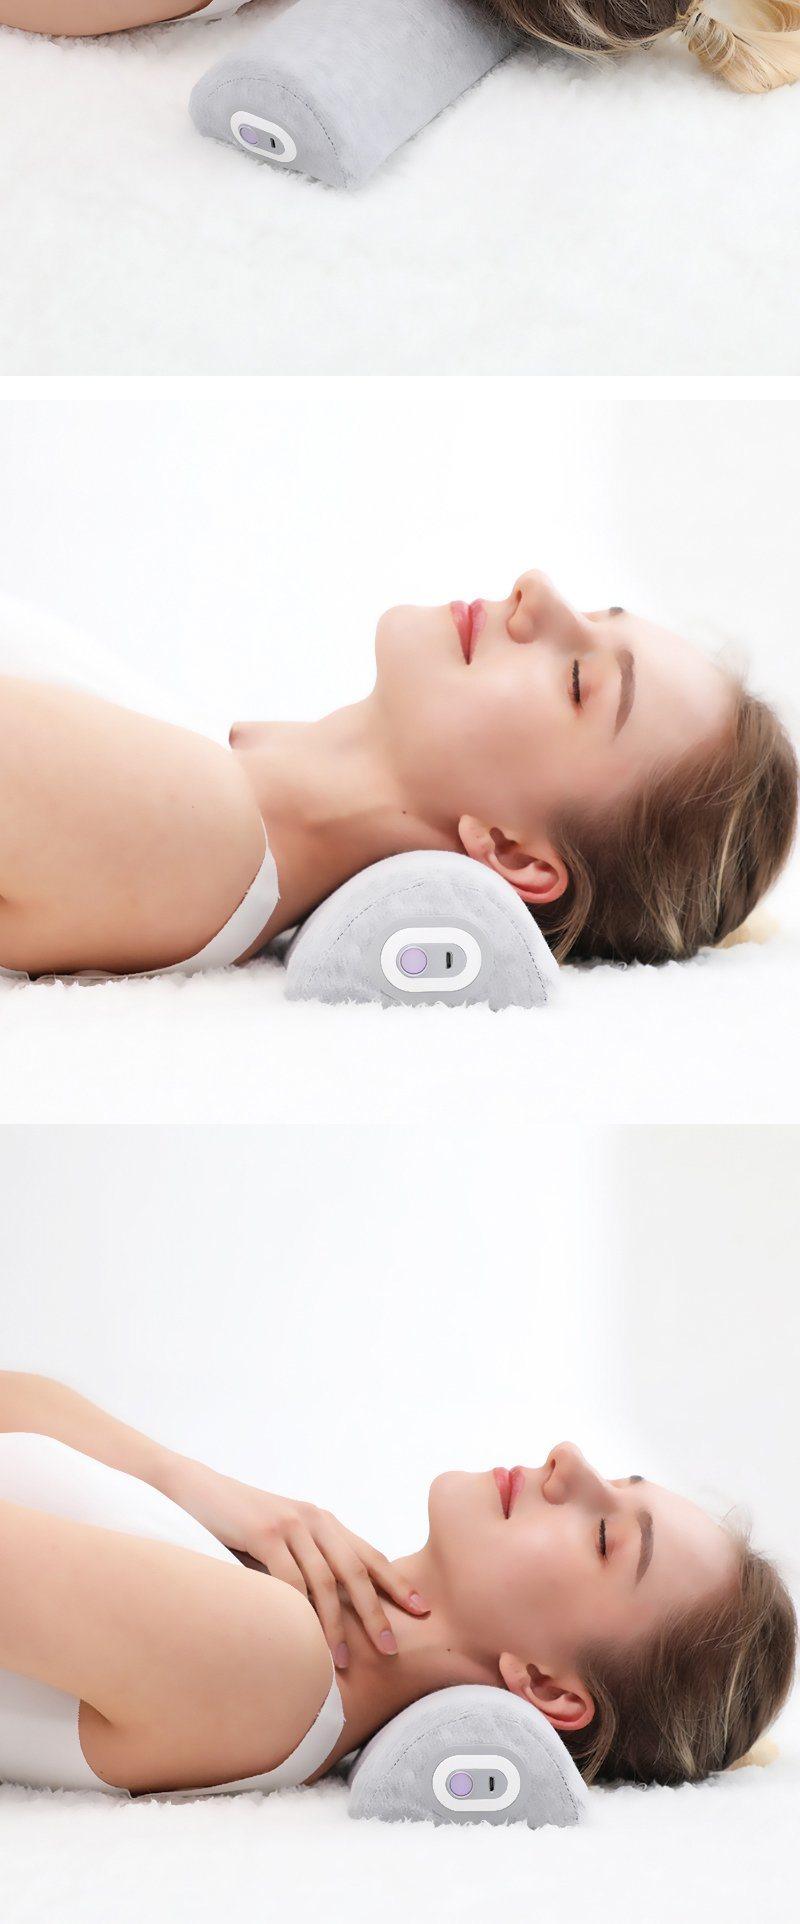 Slow Rebound Memory Foam Highly Elastic Breathable Physical Traction Neck Contour Sleep Cervical Vetebra Pillow Massager